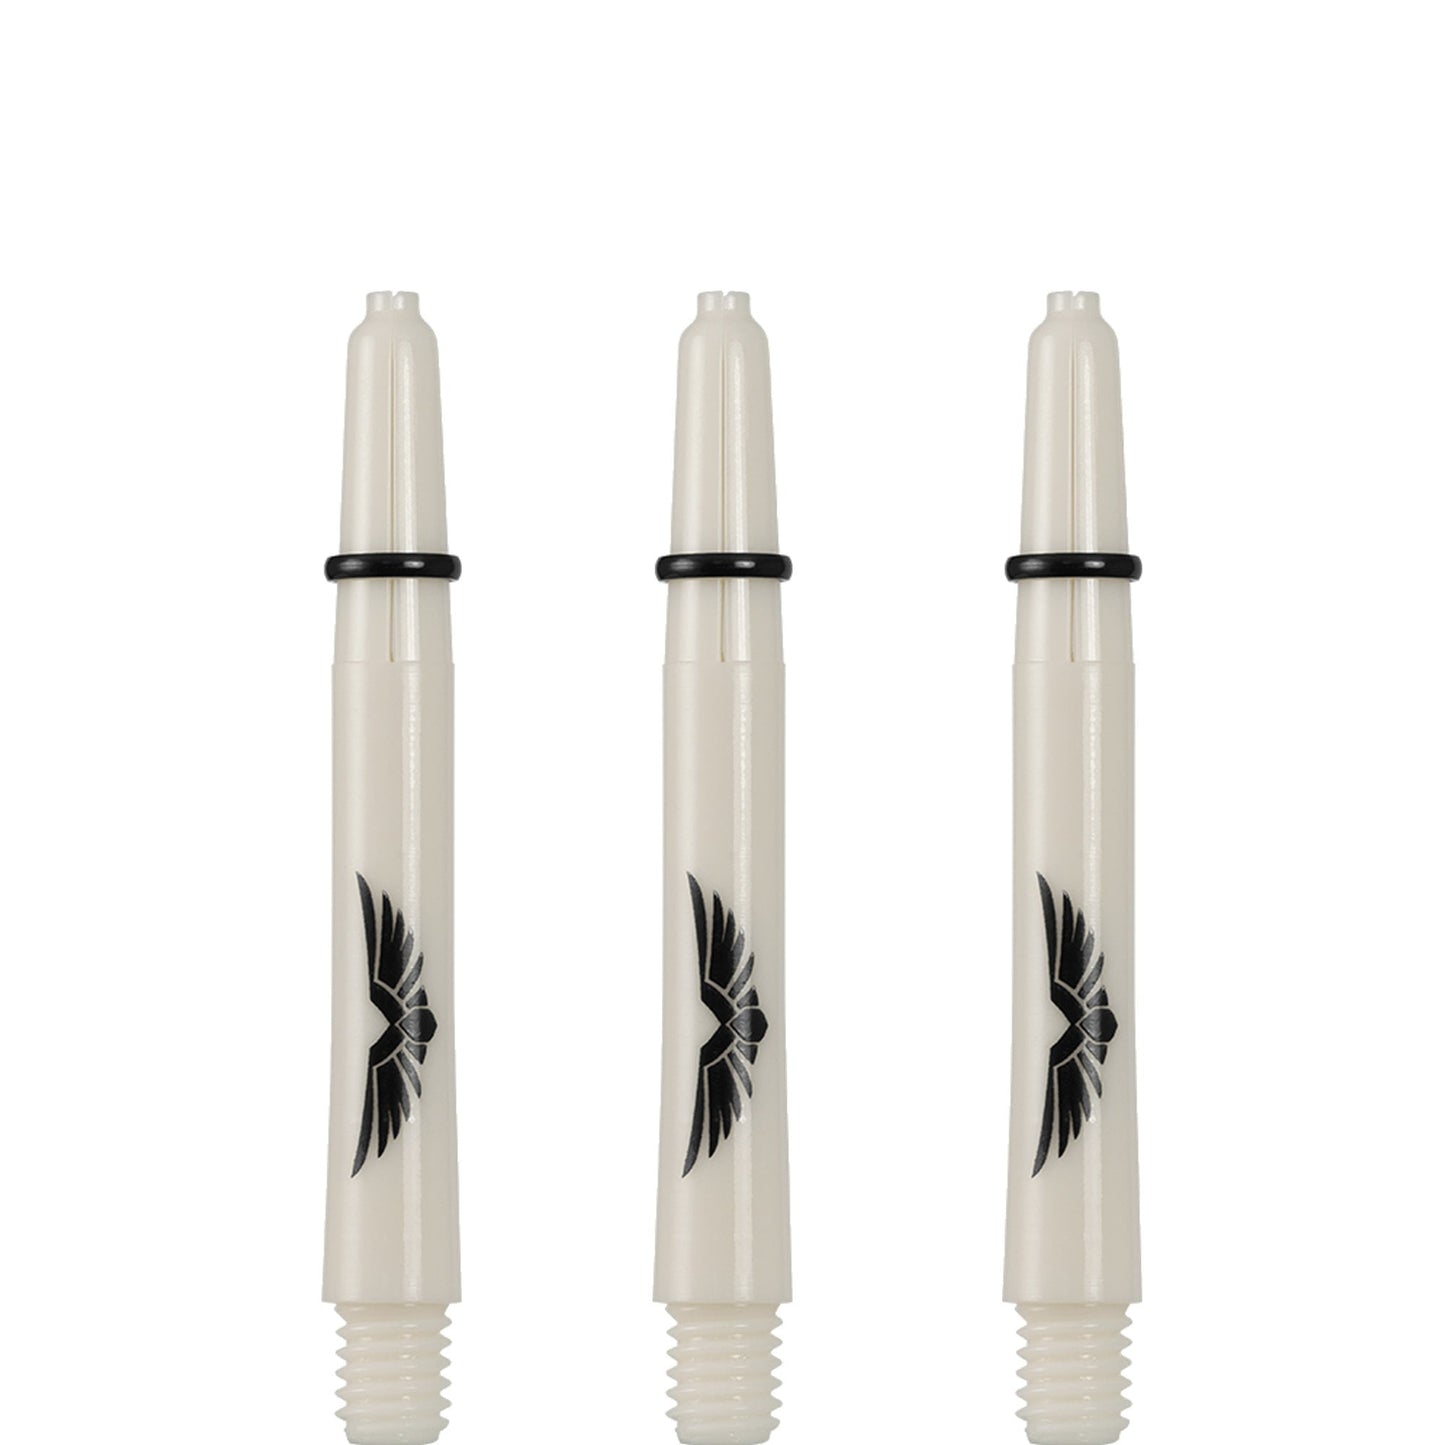 Shot Eagle Claw Dart Shafts - with Machined Rings - Strong Polycarbonate Stems - Bone White Short